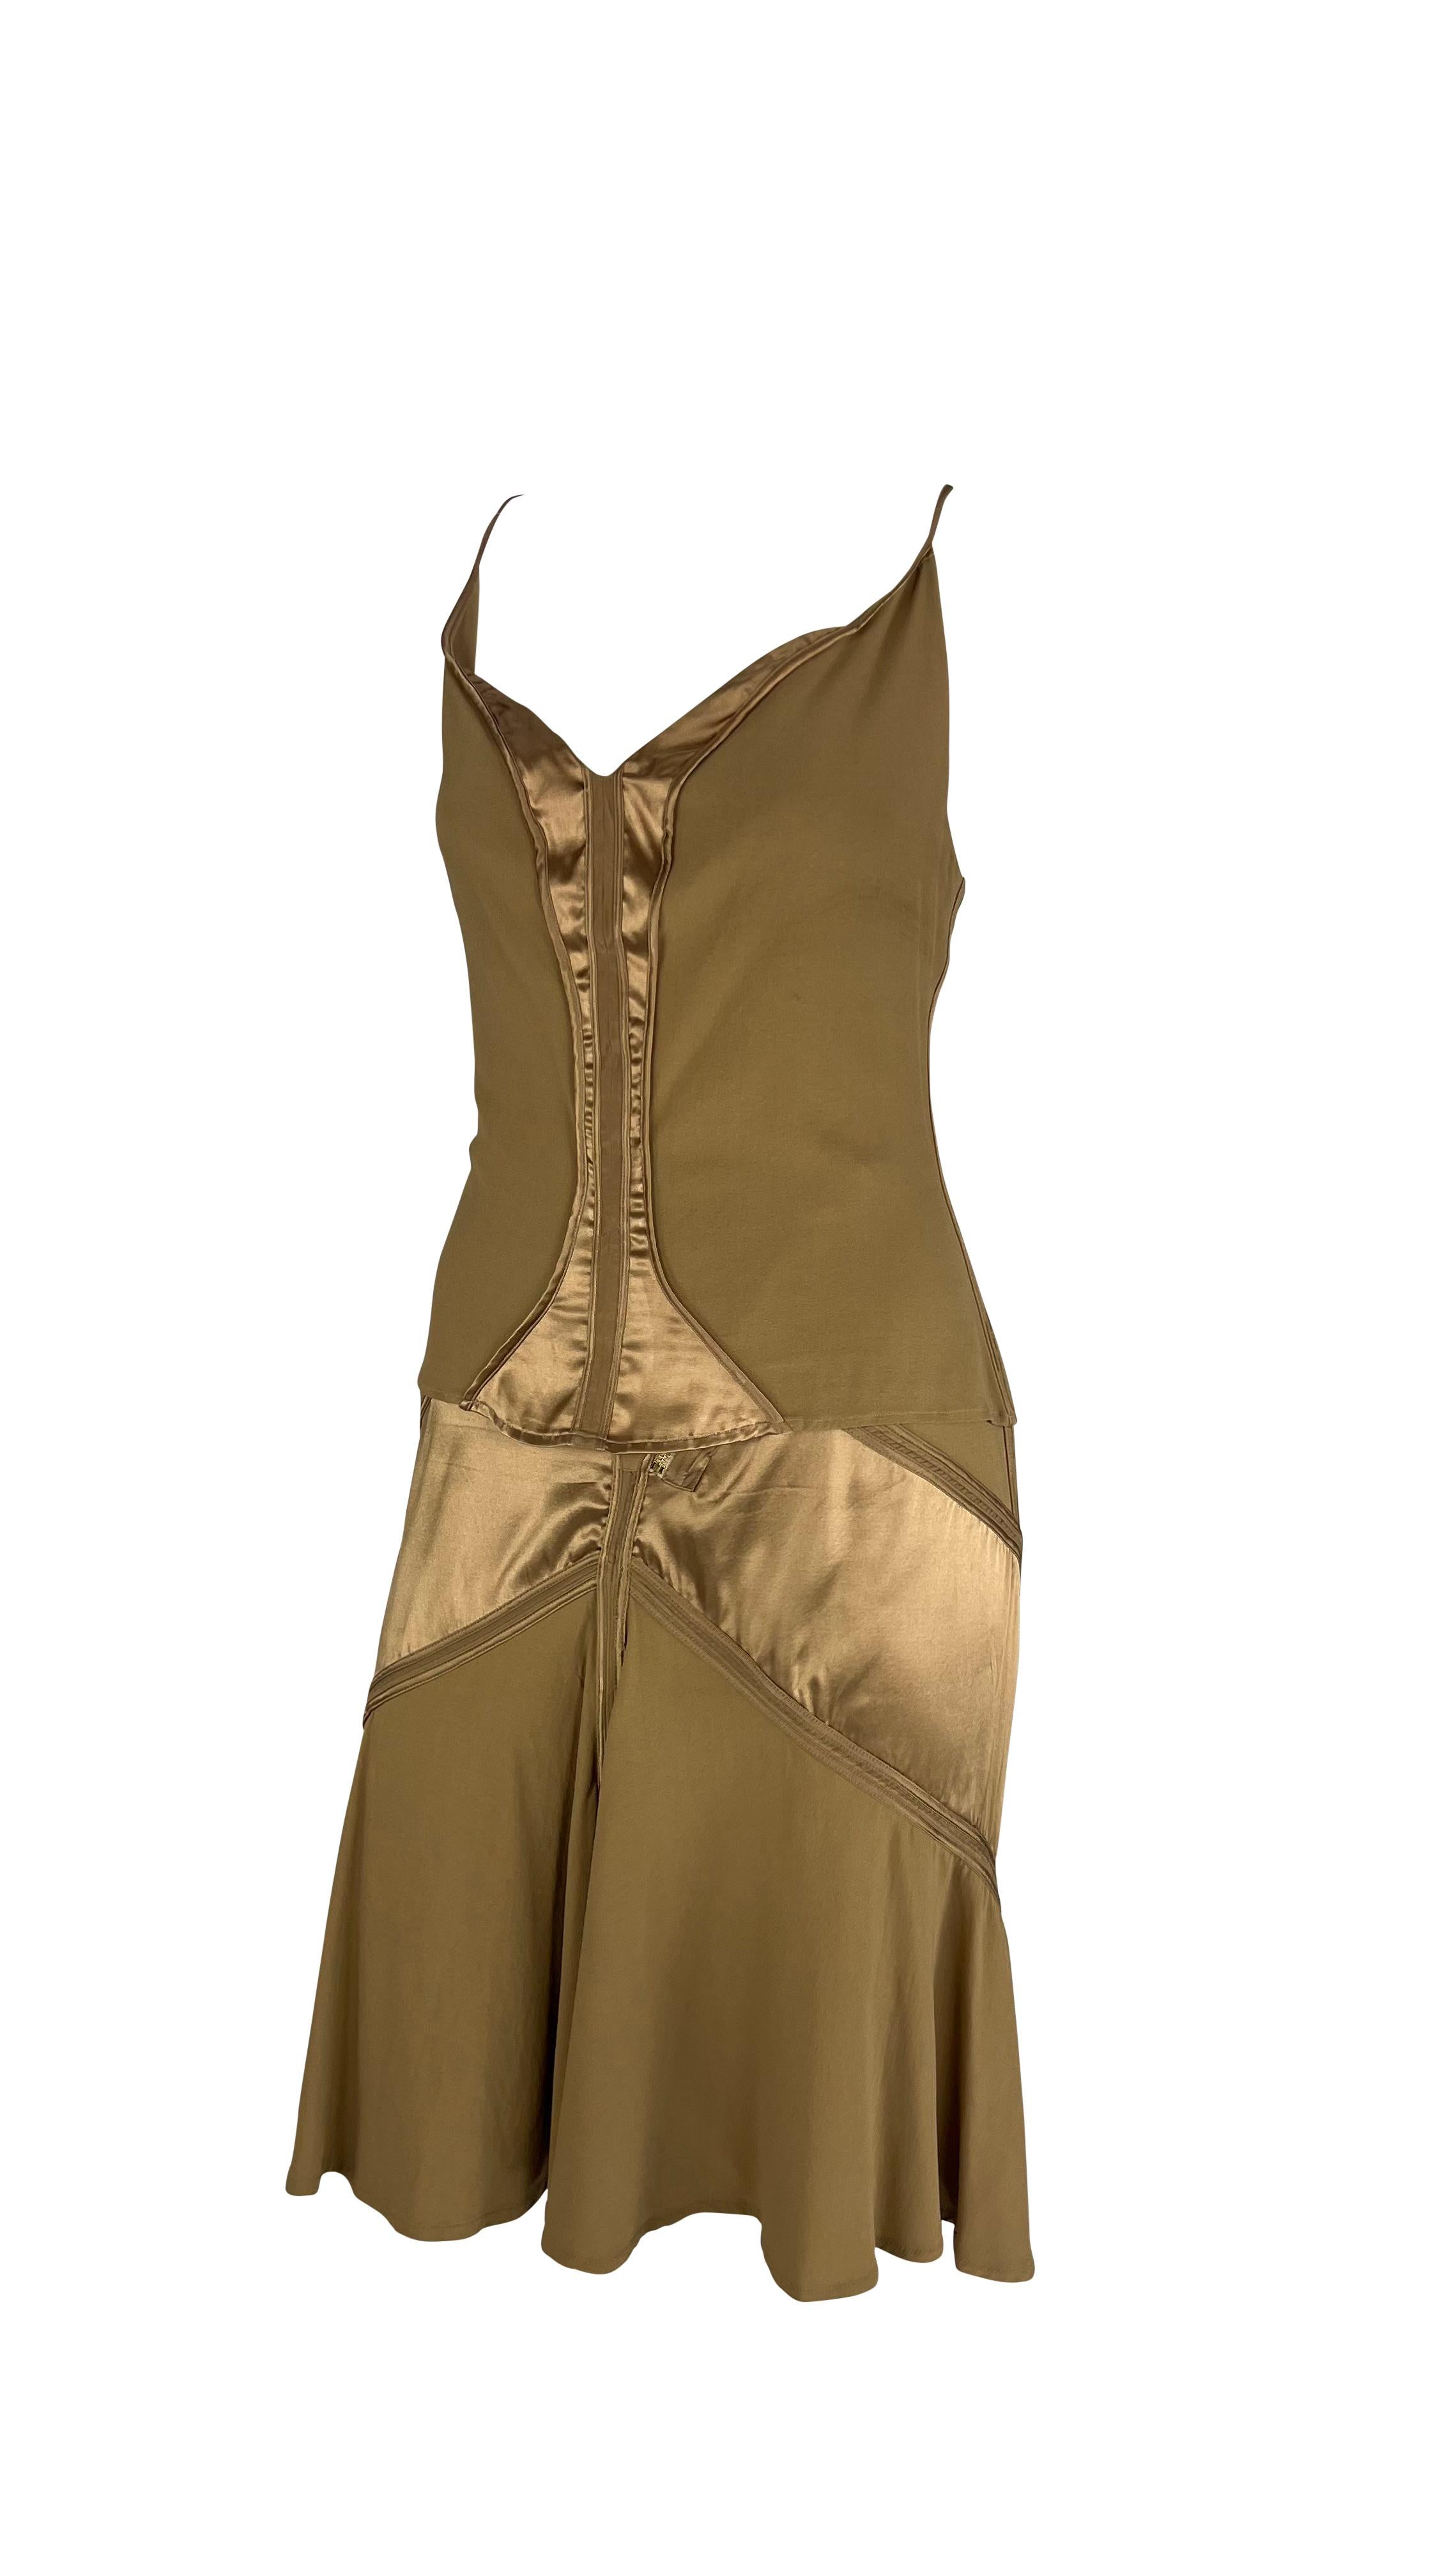 Presenting a beautiful copper-tone Roberto Cavalli tank top skirt set. From 2004, this set is comprised of a spaghetti strap tank top and a matching flare skirt. Both pieces feature silk satin details and a gold zipper accent. Whether worn together